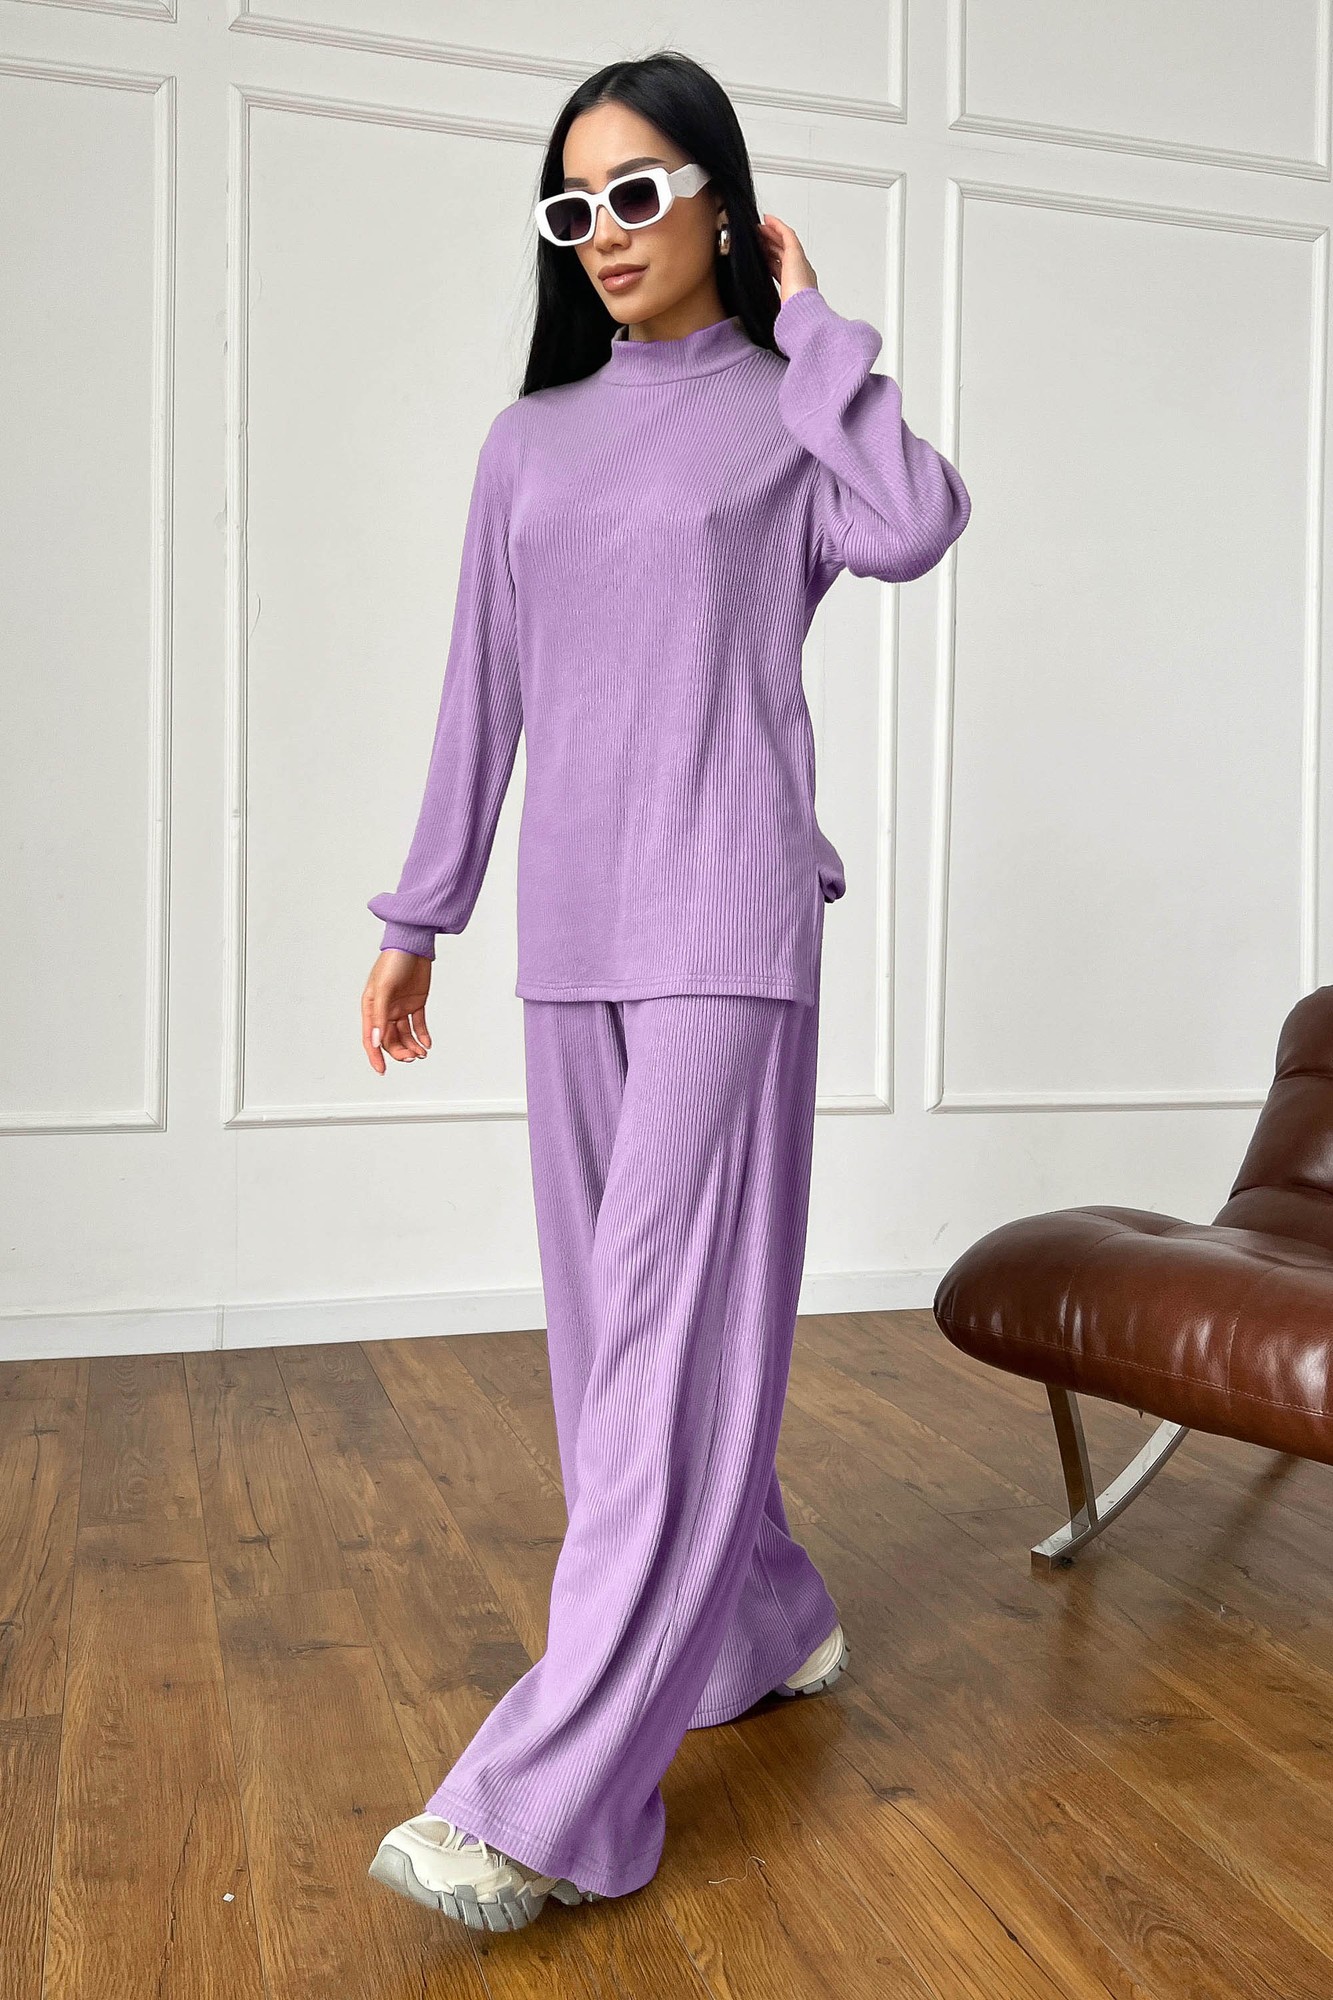 Tunic and culotte suit in violet color